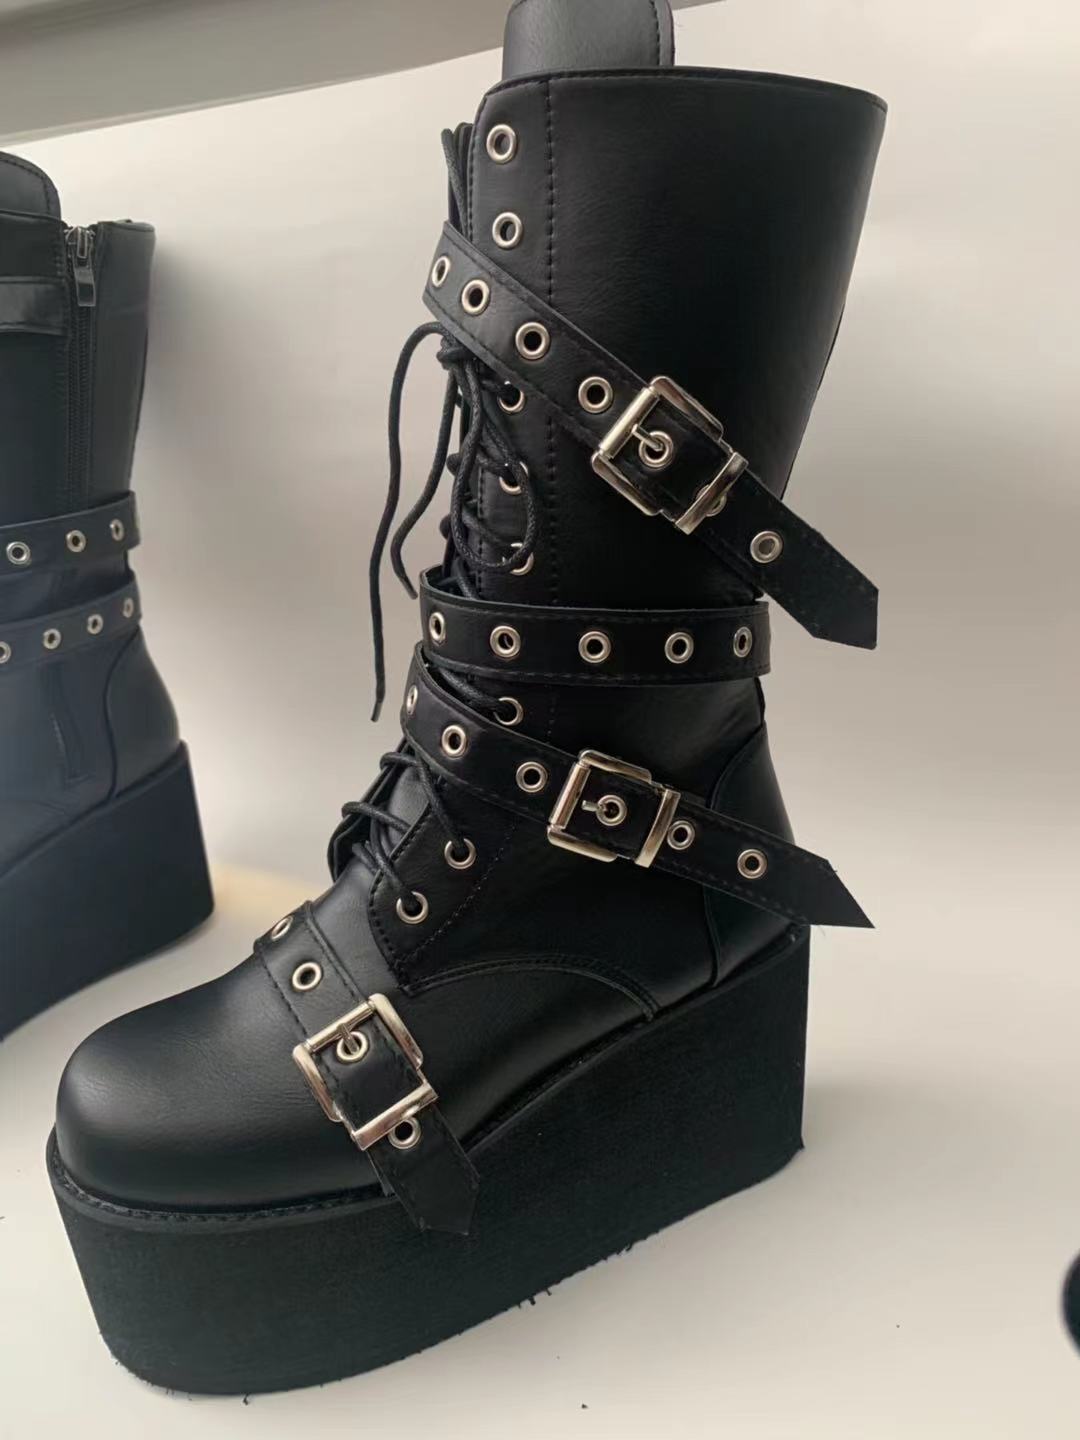 Primary image for Black Gothic Motorcycle Boots Zip High Heel Punk Chunky Platform Mid-Calf Women 